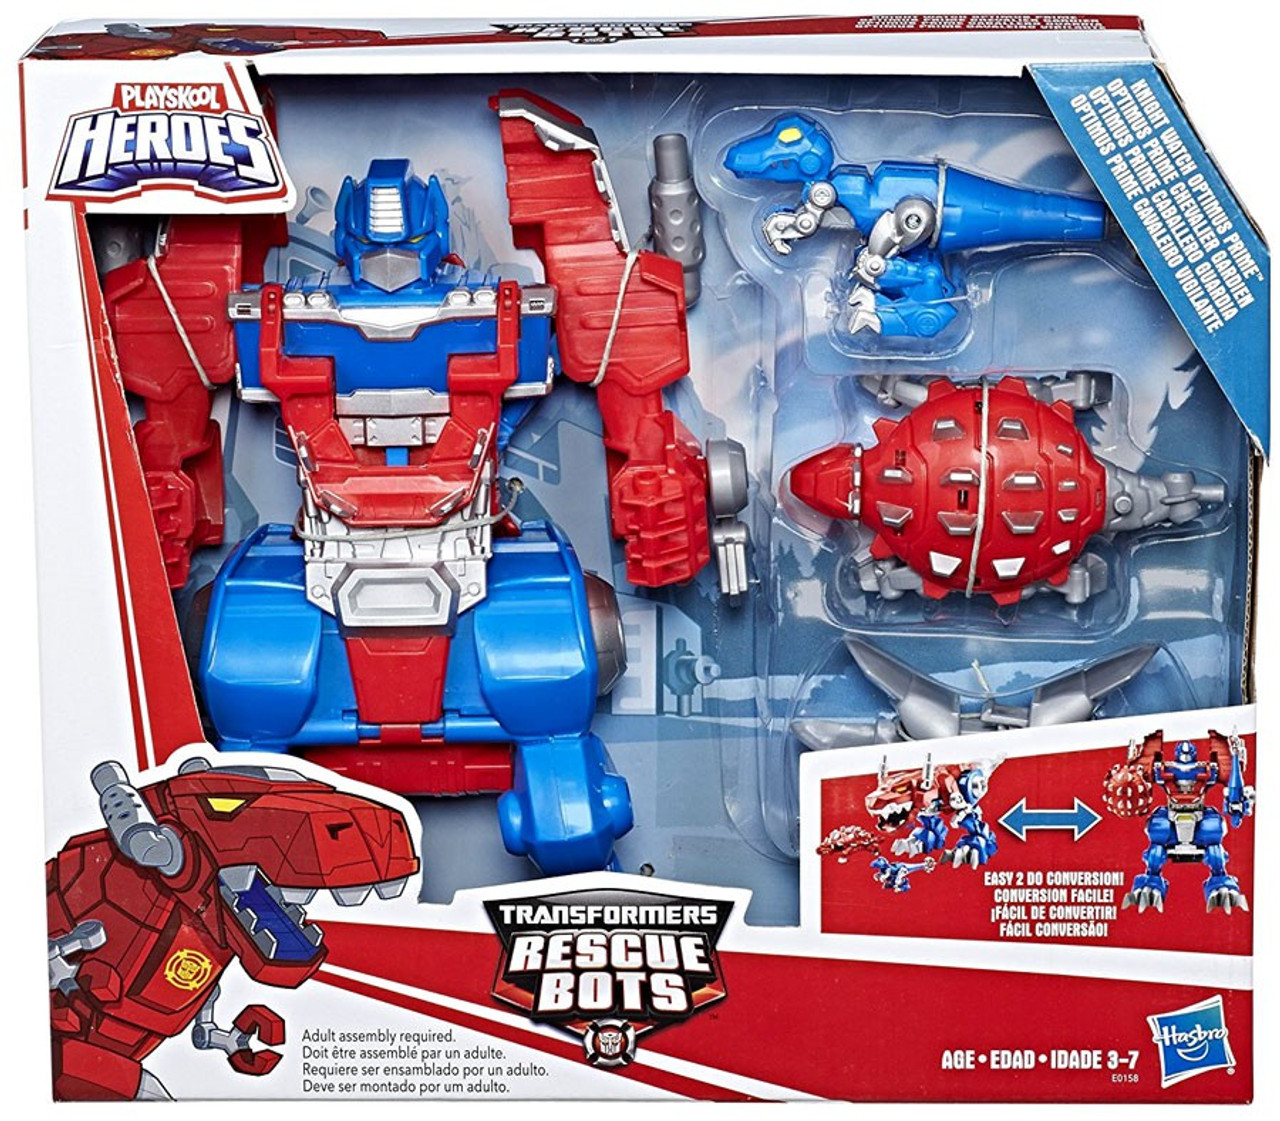 Transformers Playskool Heroes Rescue Bots Knight Watch Optimus Prime Action Figure Damaged Package Hasbro Toys Toywiz - blue guardia roblox